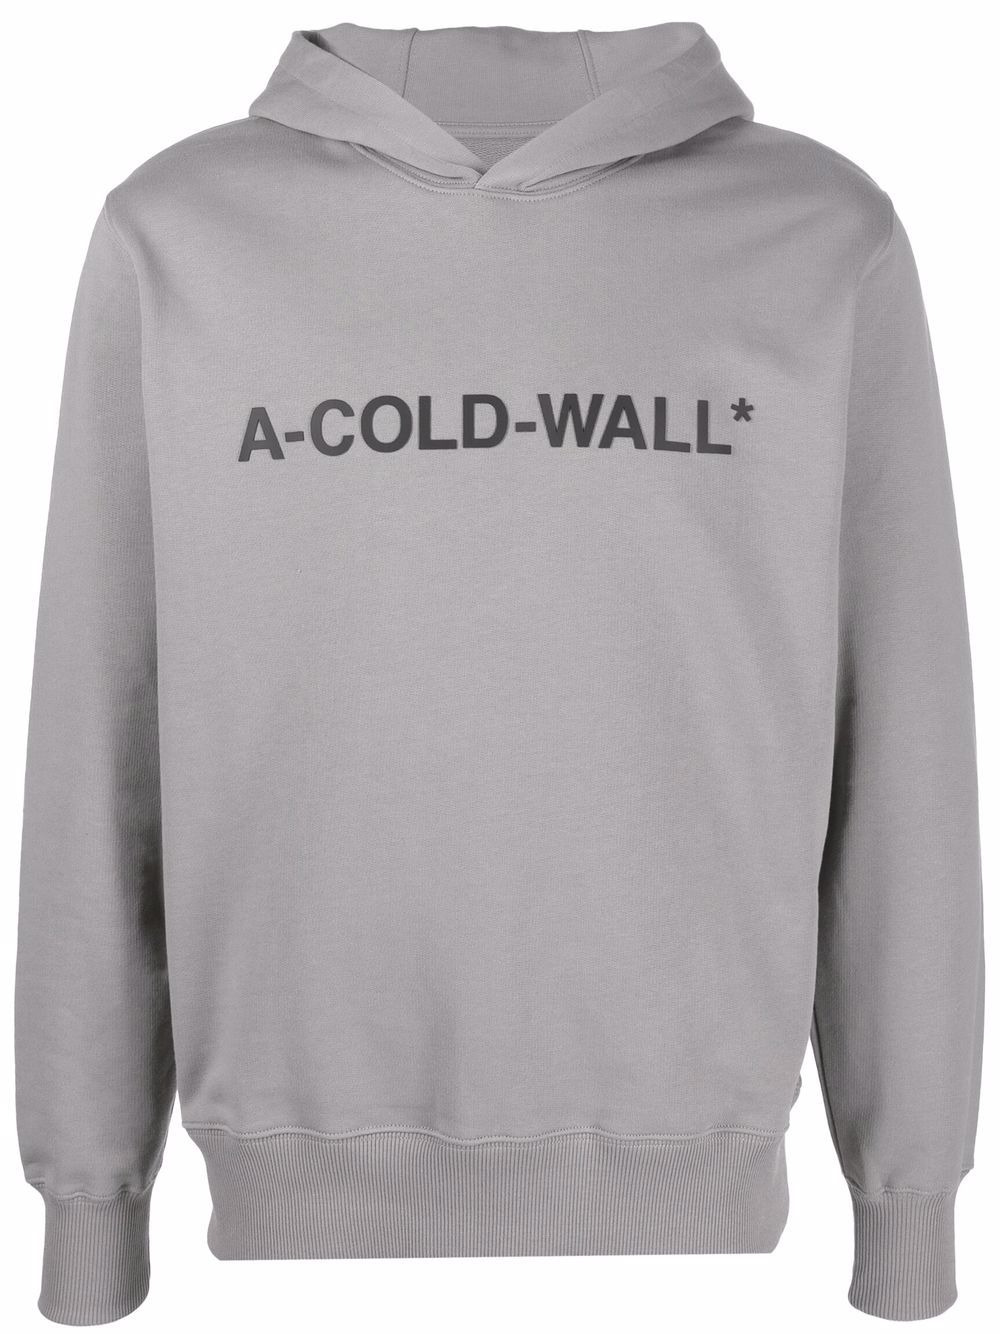 A-COLD-WALL* logo pullover hoodie - Grey von A-COLD-WALL*